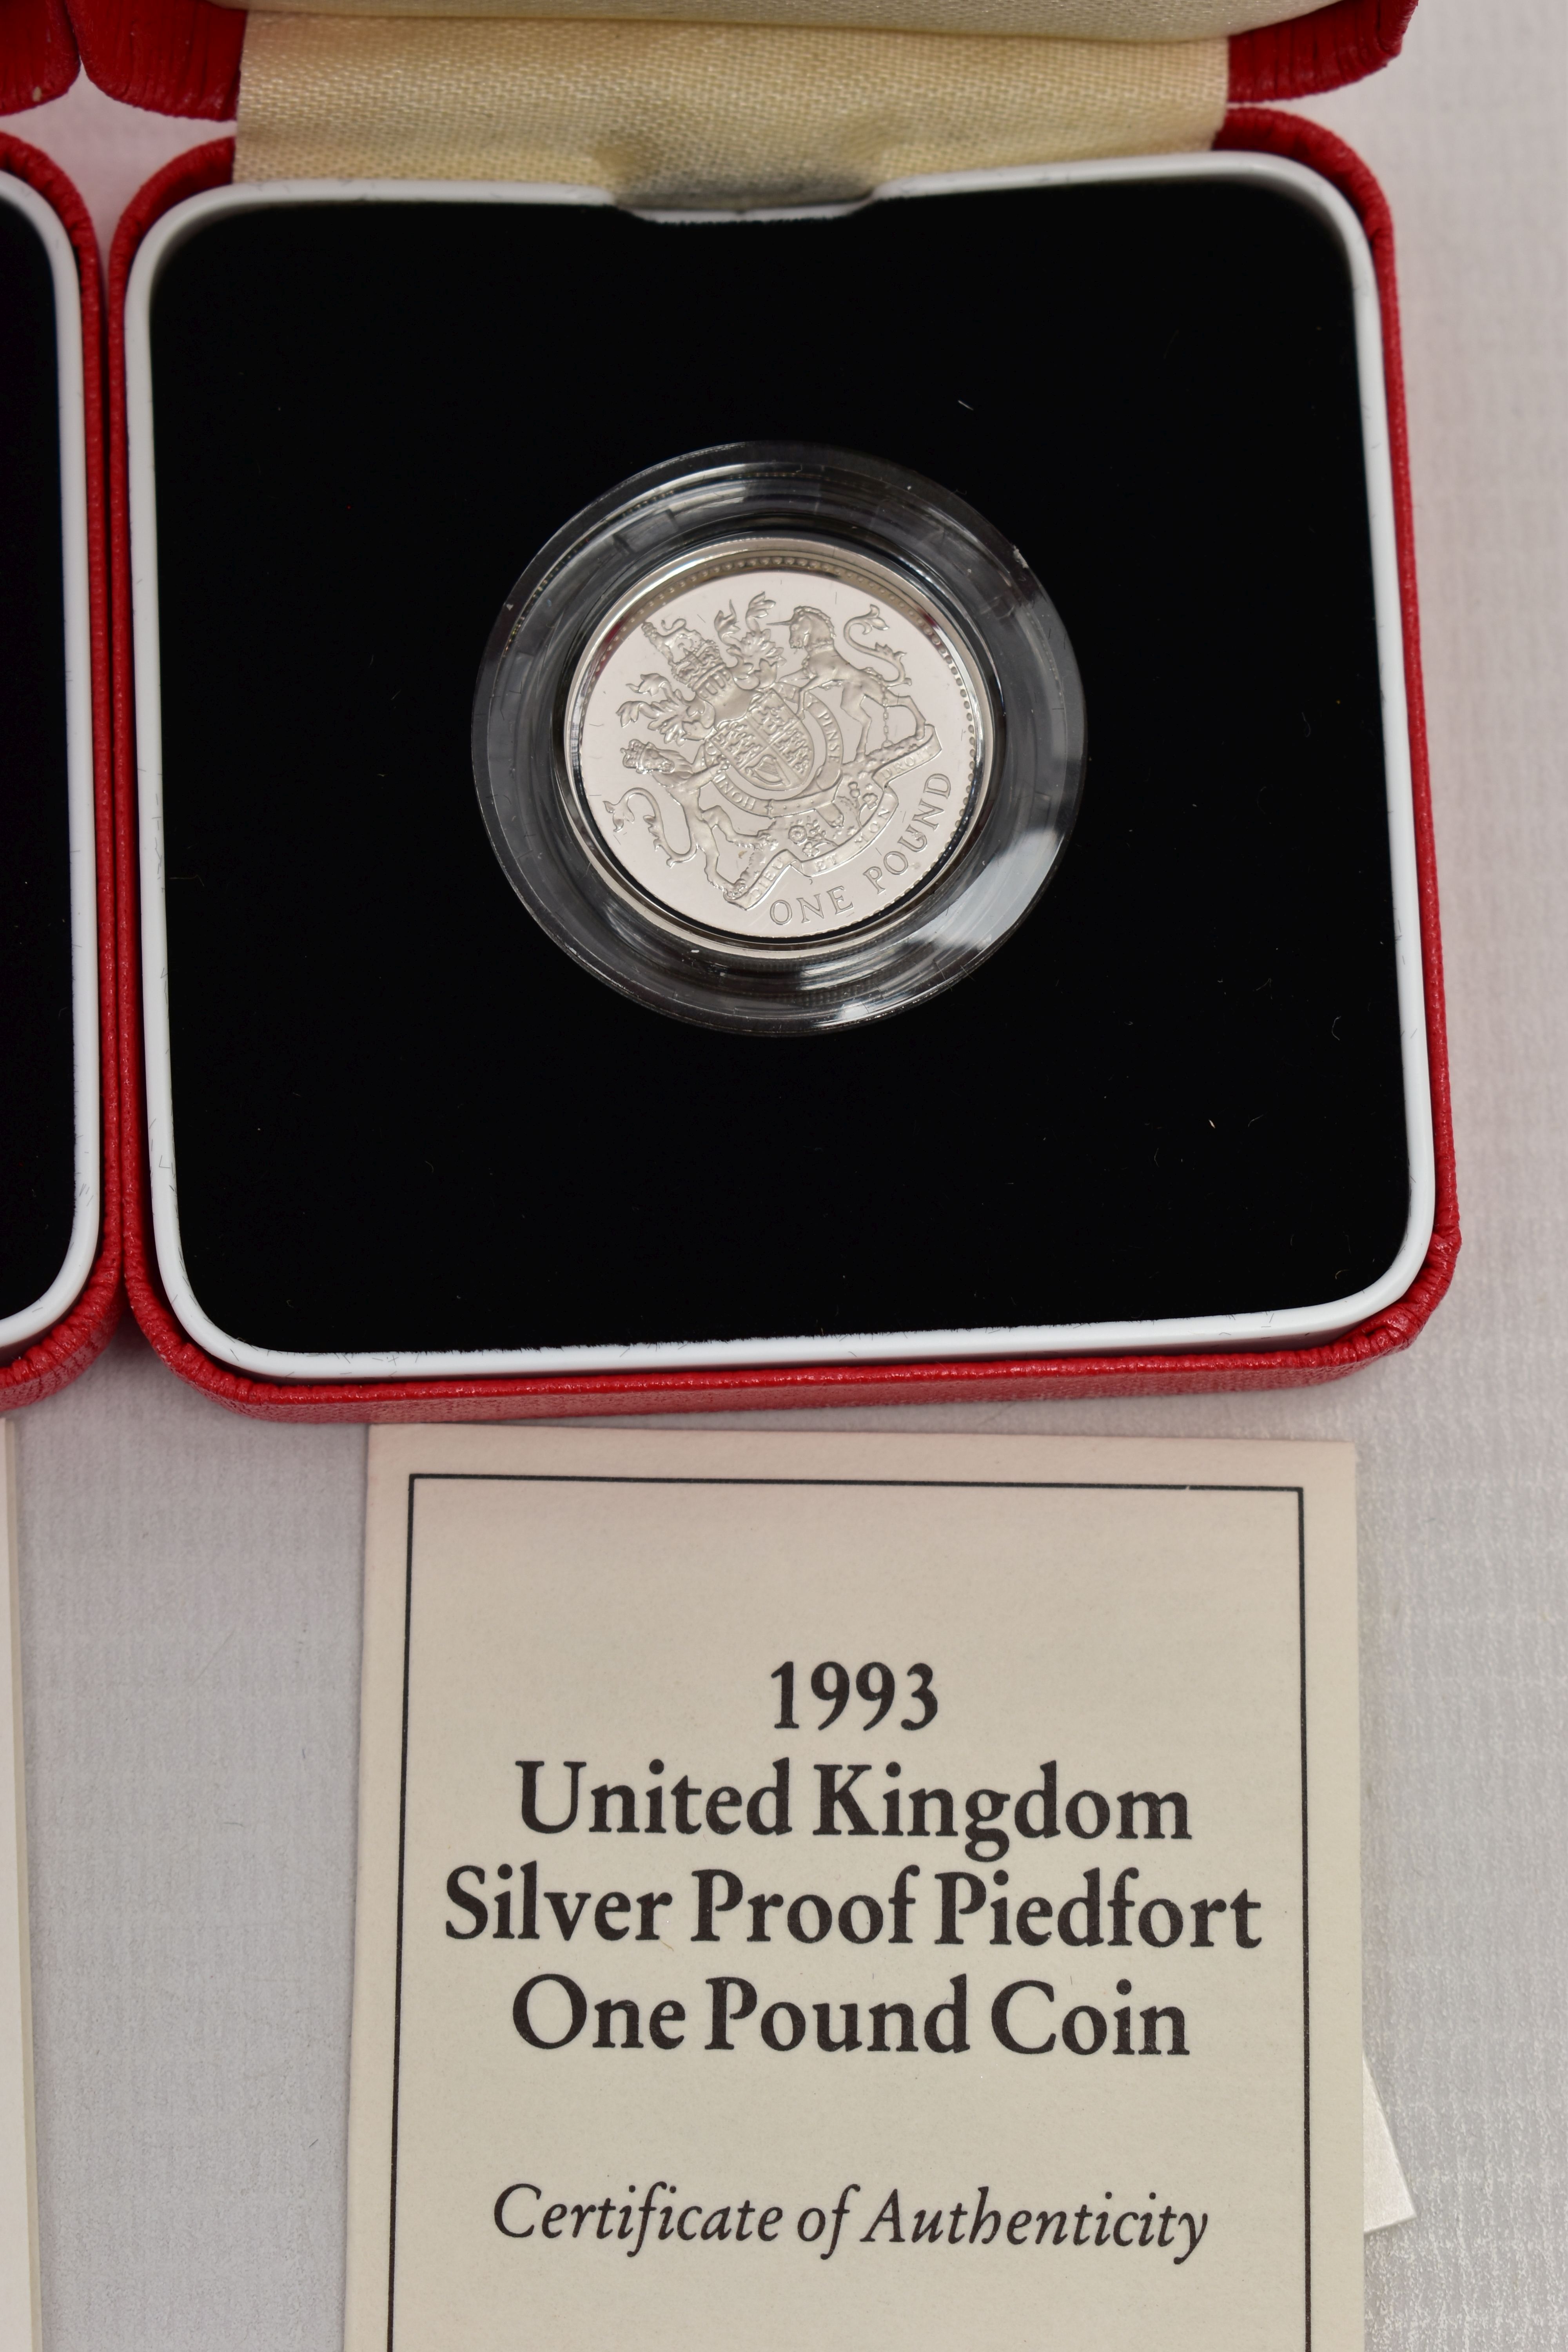 SILVER PIEDFORT PROOF ROYAL MINT ONE POUND COINS 1993, 1994, 1995, all with cetificates - Image 3 of 3